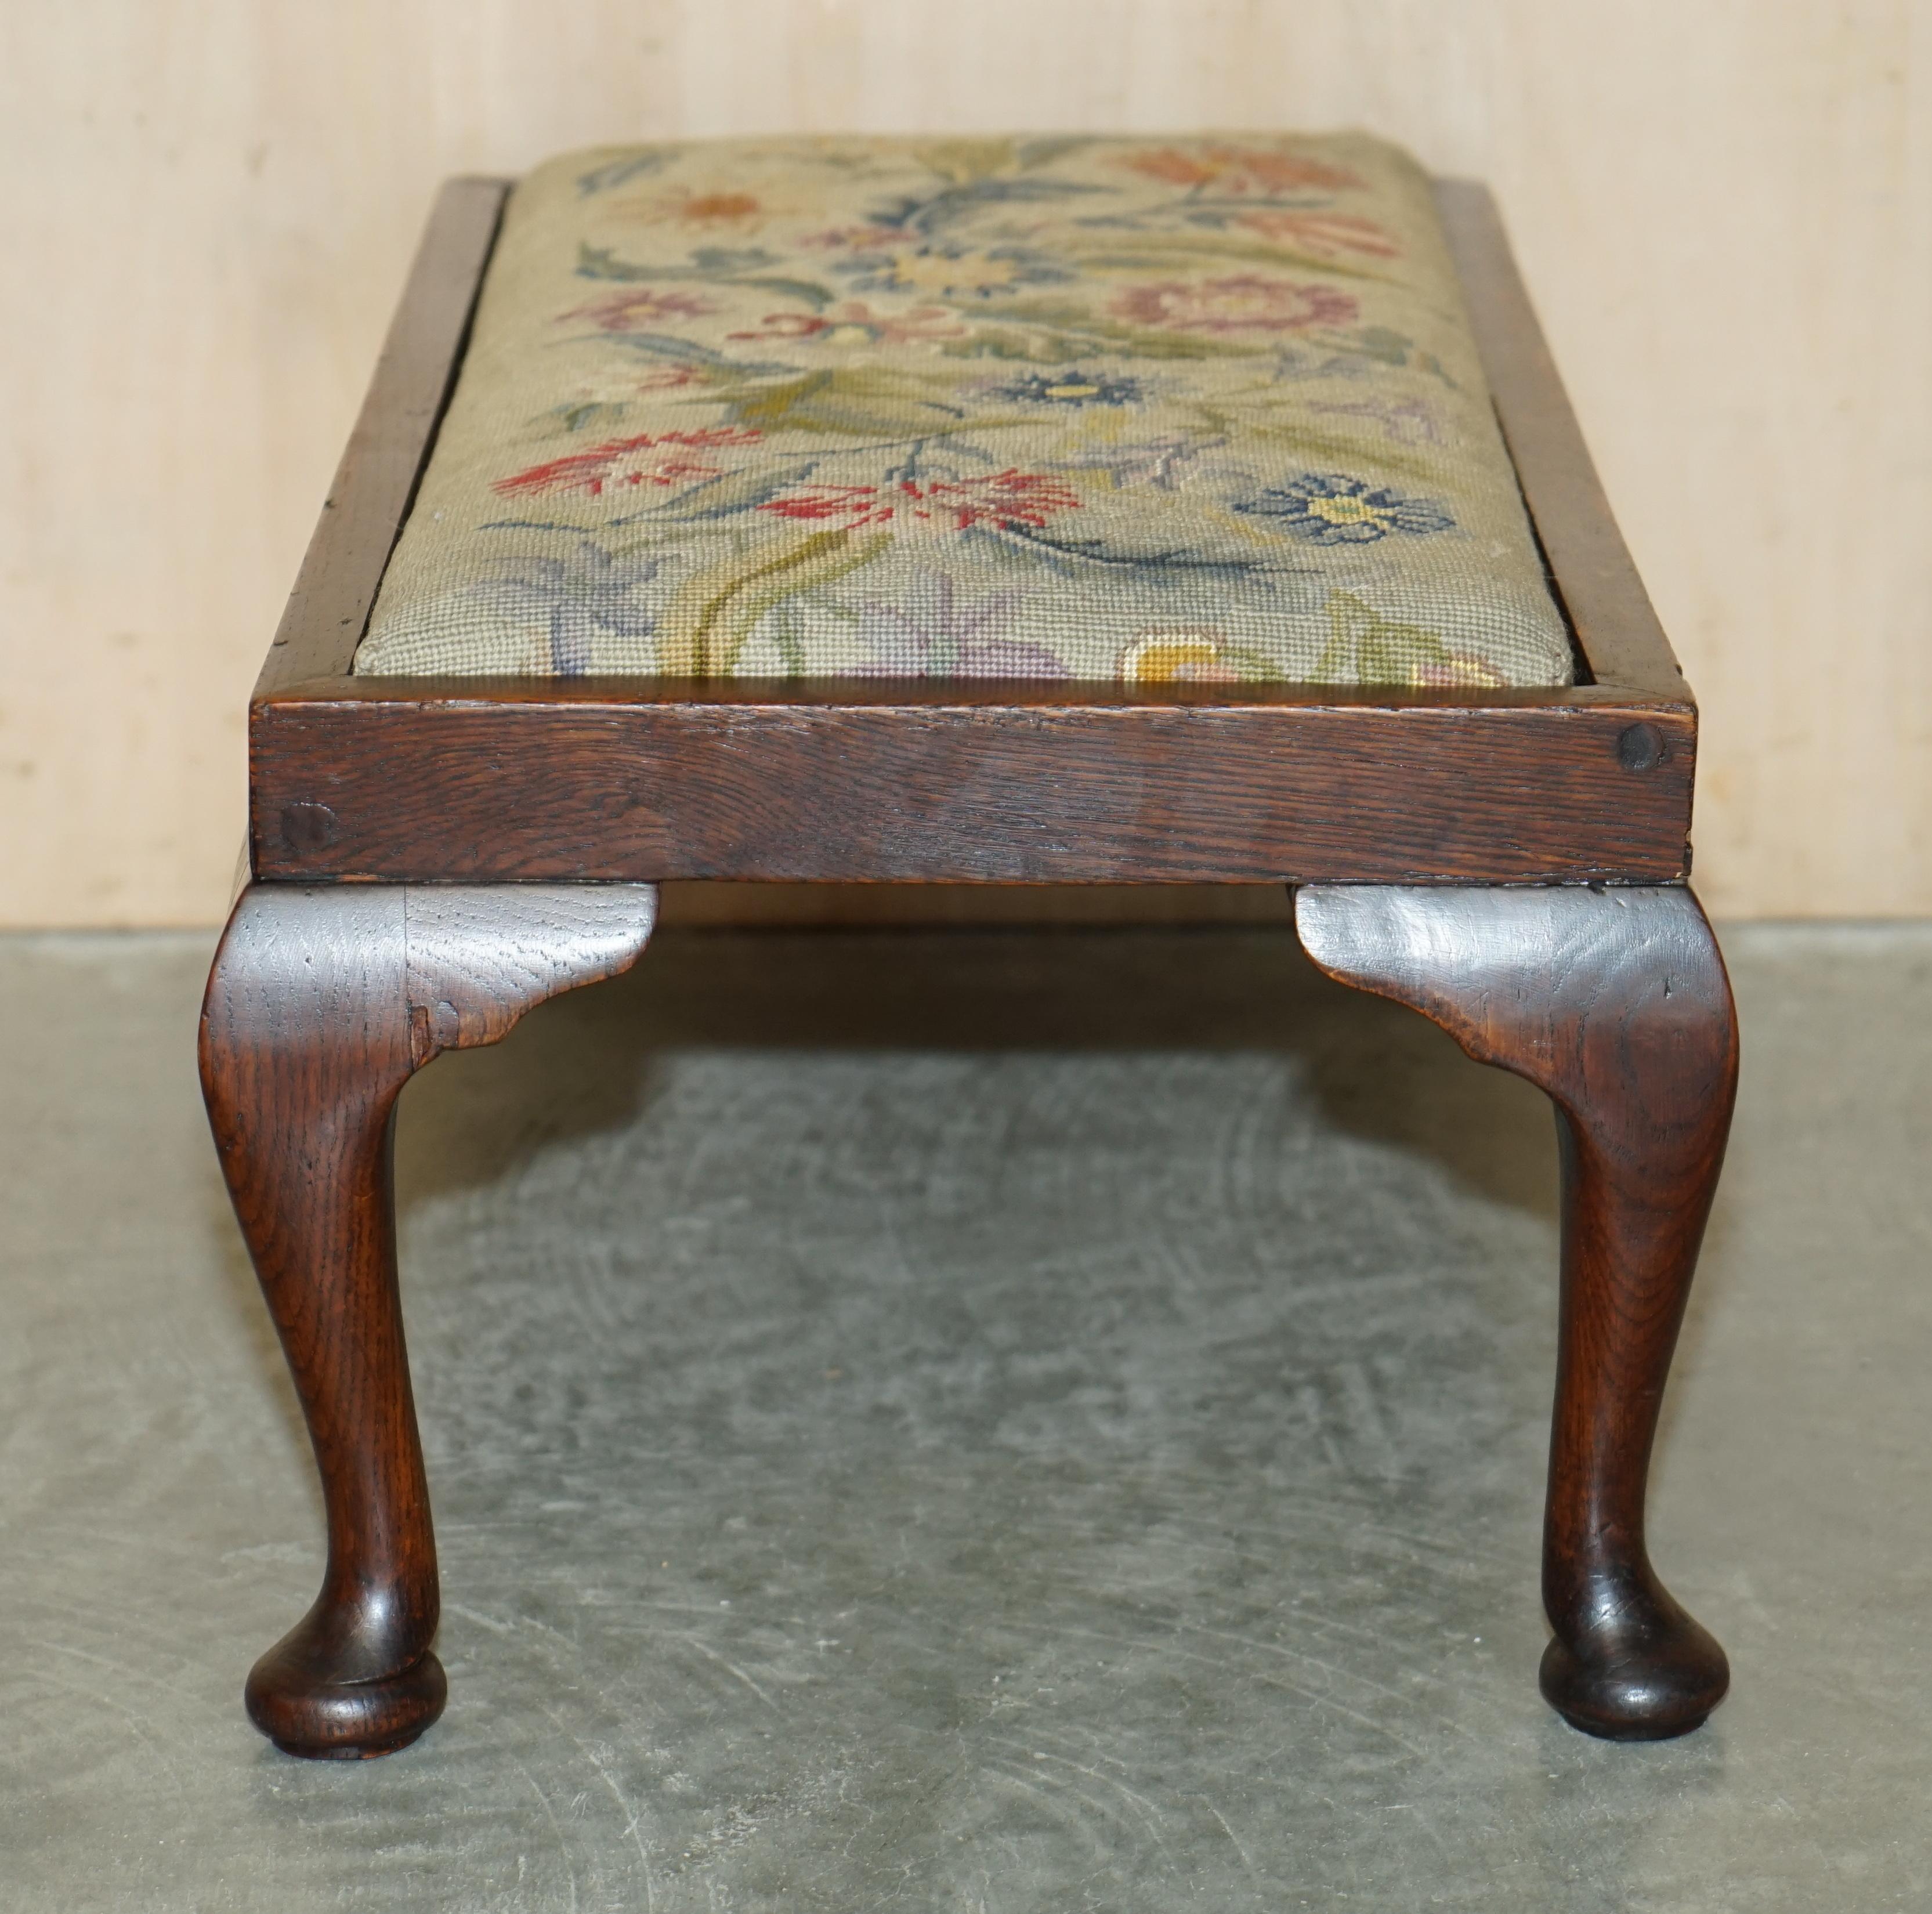 Antique Edwardian Walnut Cabriole Legged Footstool Embroidered Upholstery For Sale 11